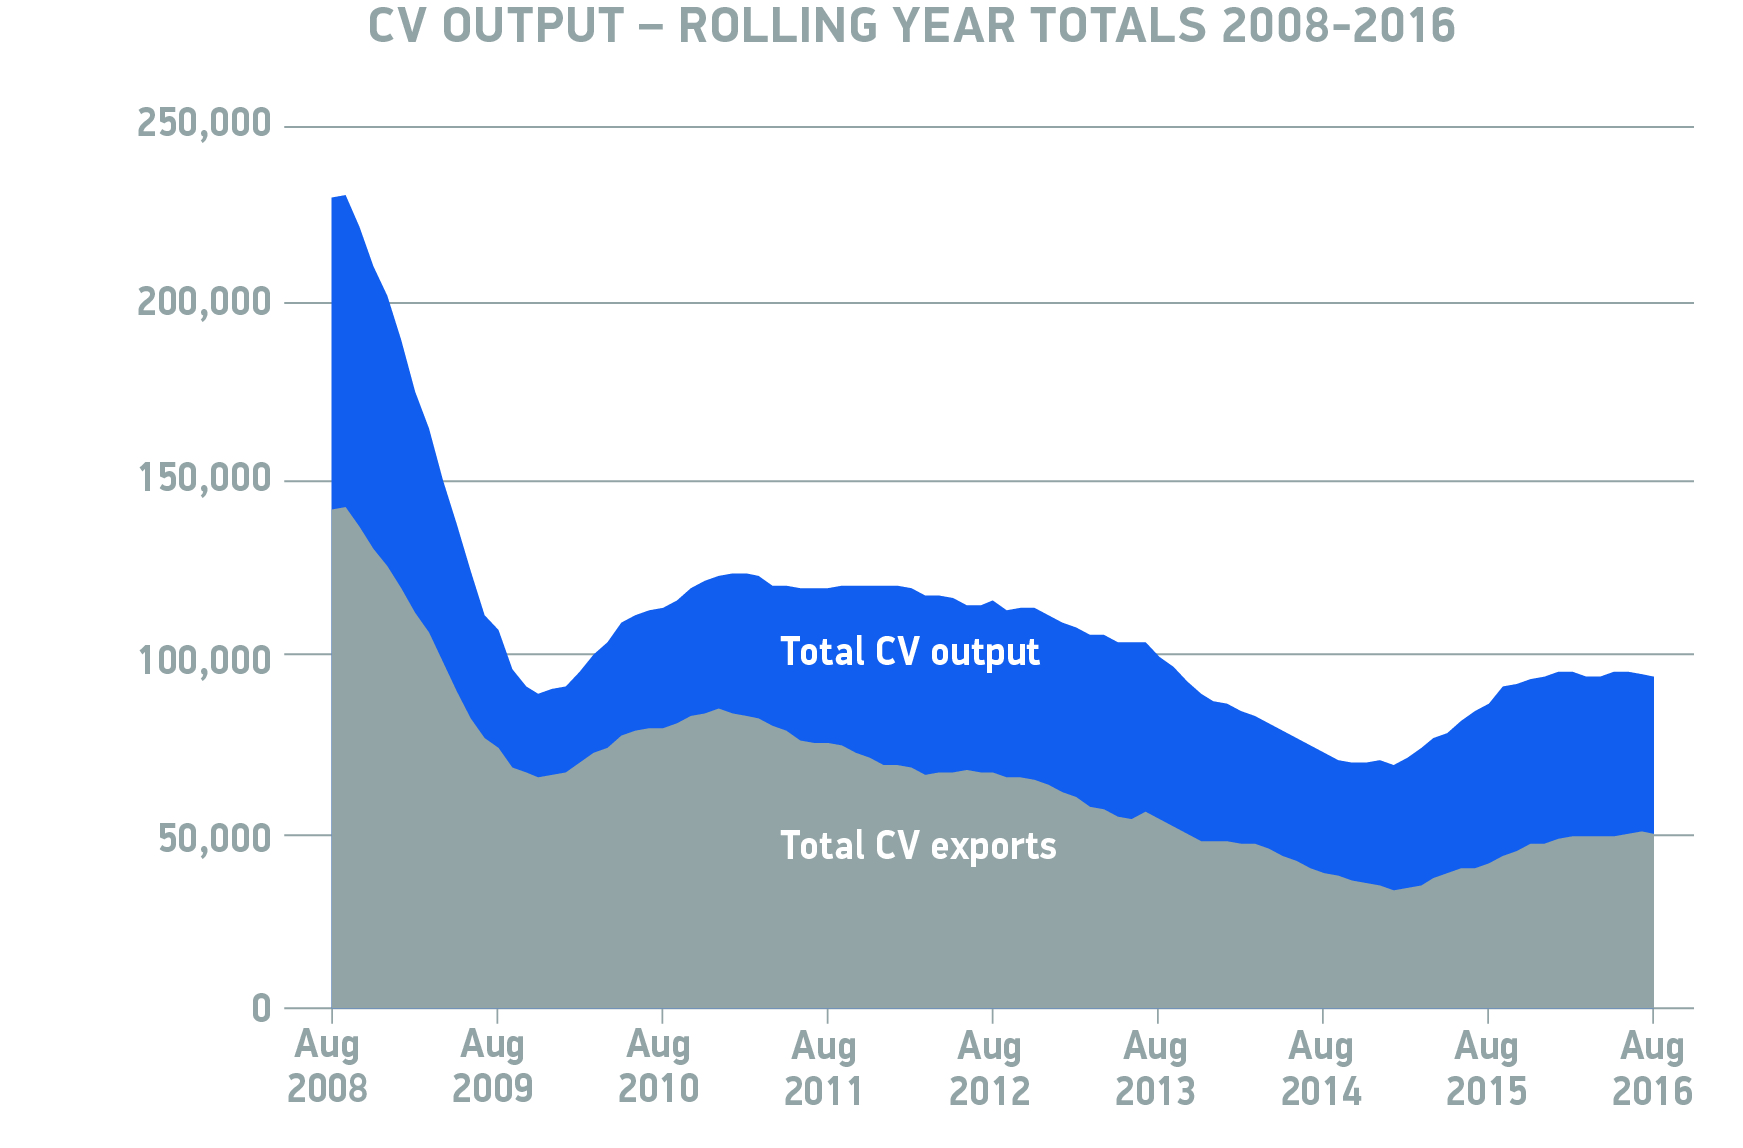 cv-output-rolling-year-totals-2009-2016-aug-2016